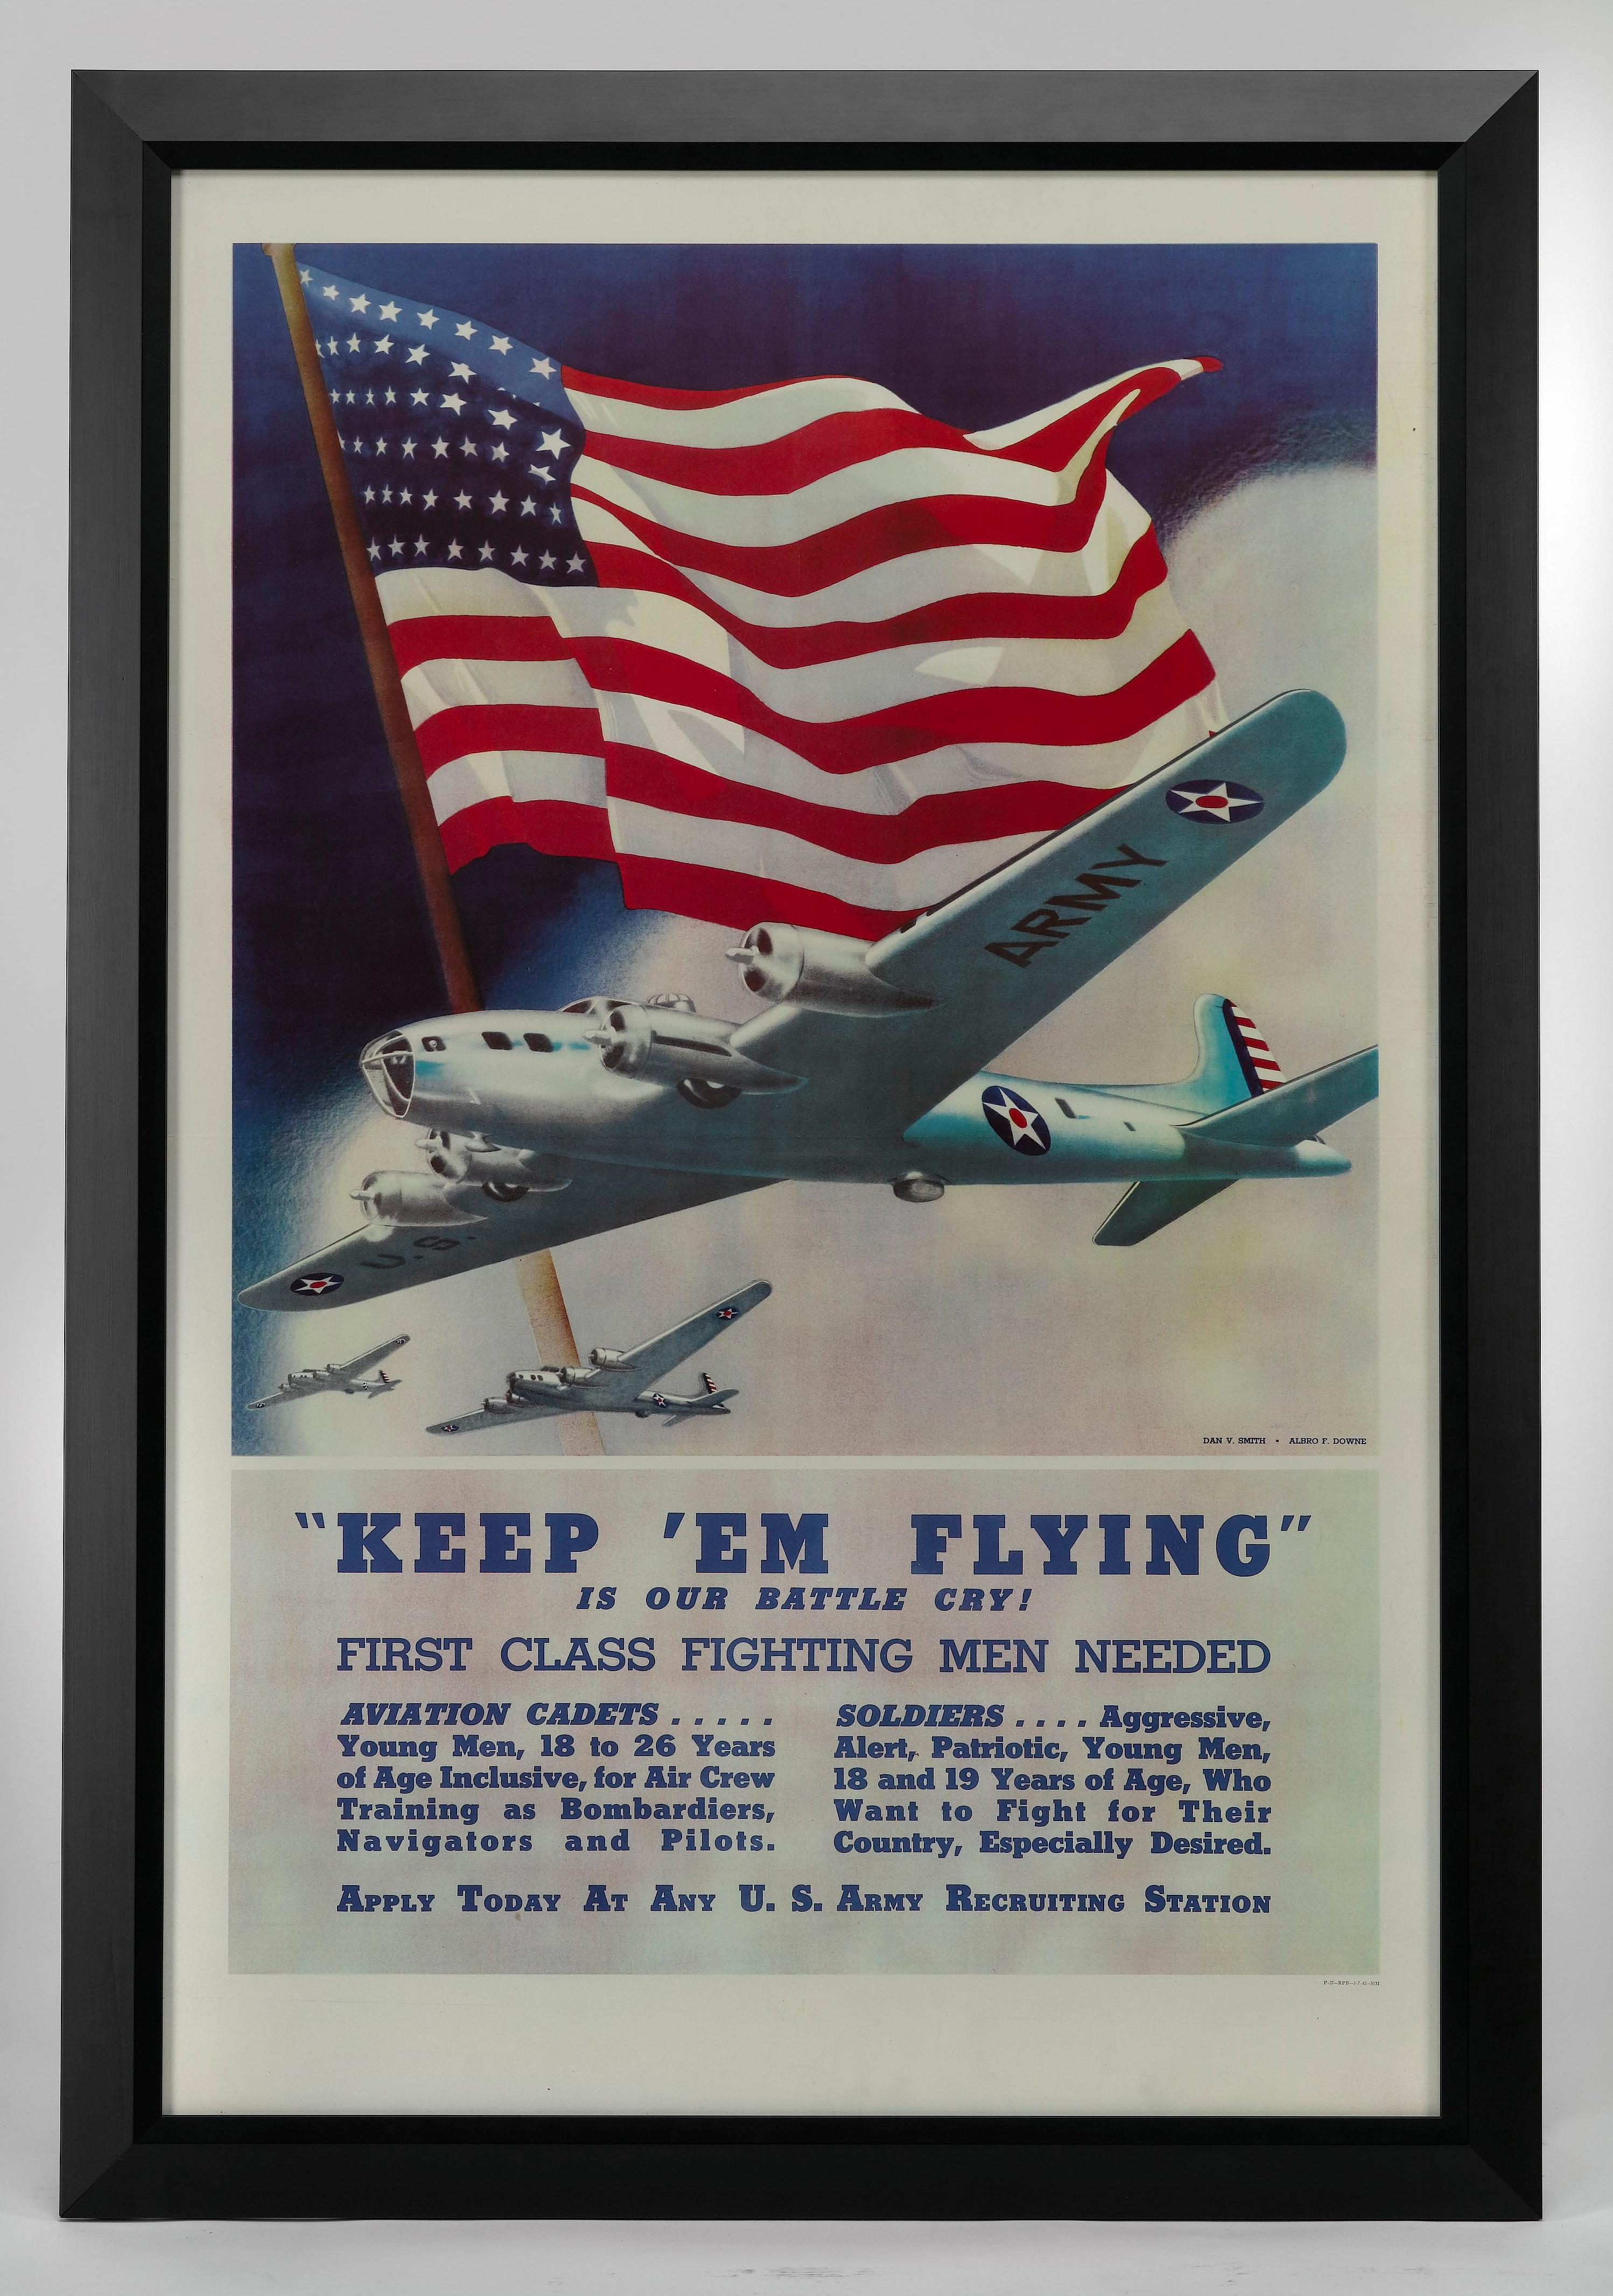 Presented is a vintage WWII recruitment poster by the artist team Dan V. Smith and Albrow F. Downe. The poster features three Boeing B-17 Flying Fortresses set in front of a large, waving American flag. The poster was issued by the United States